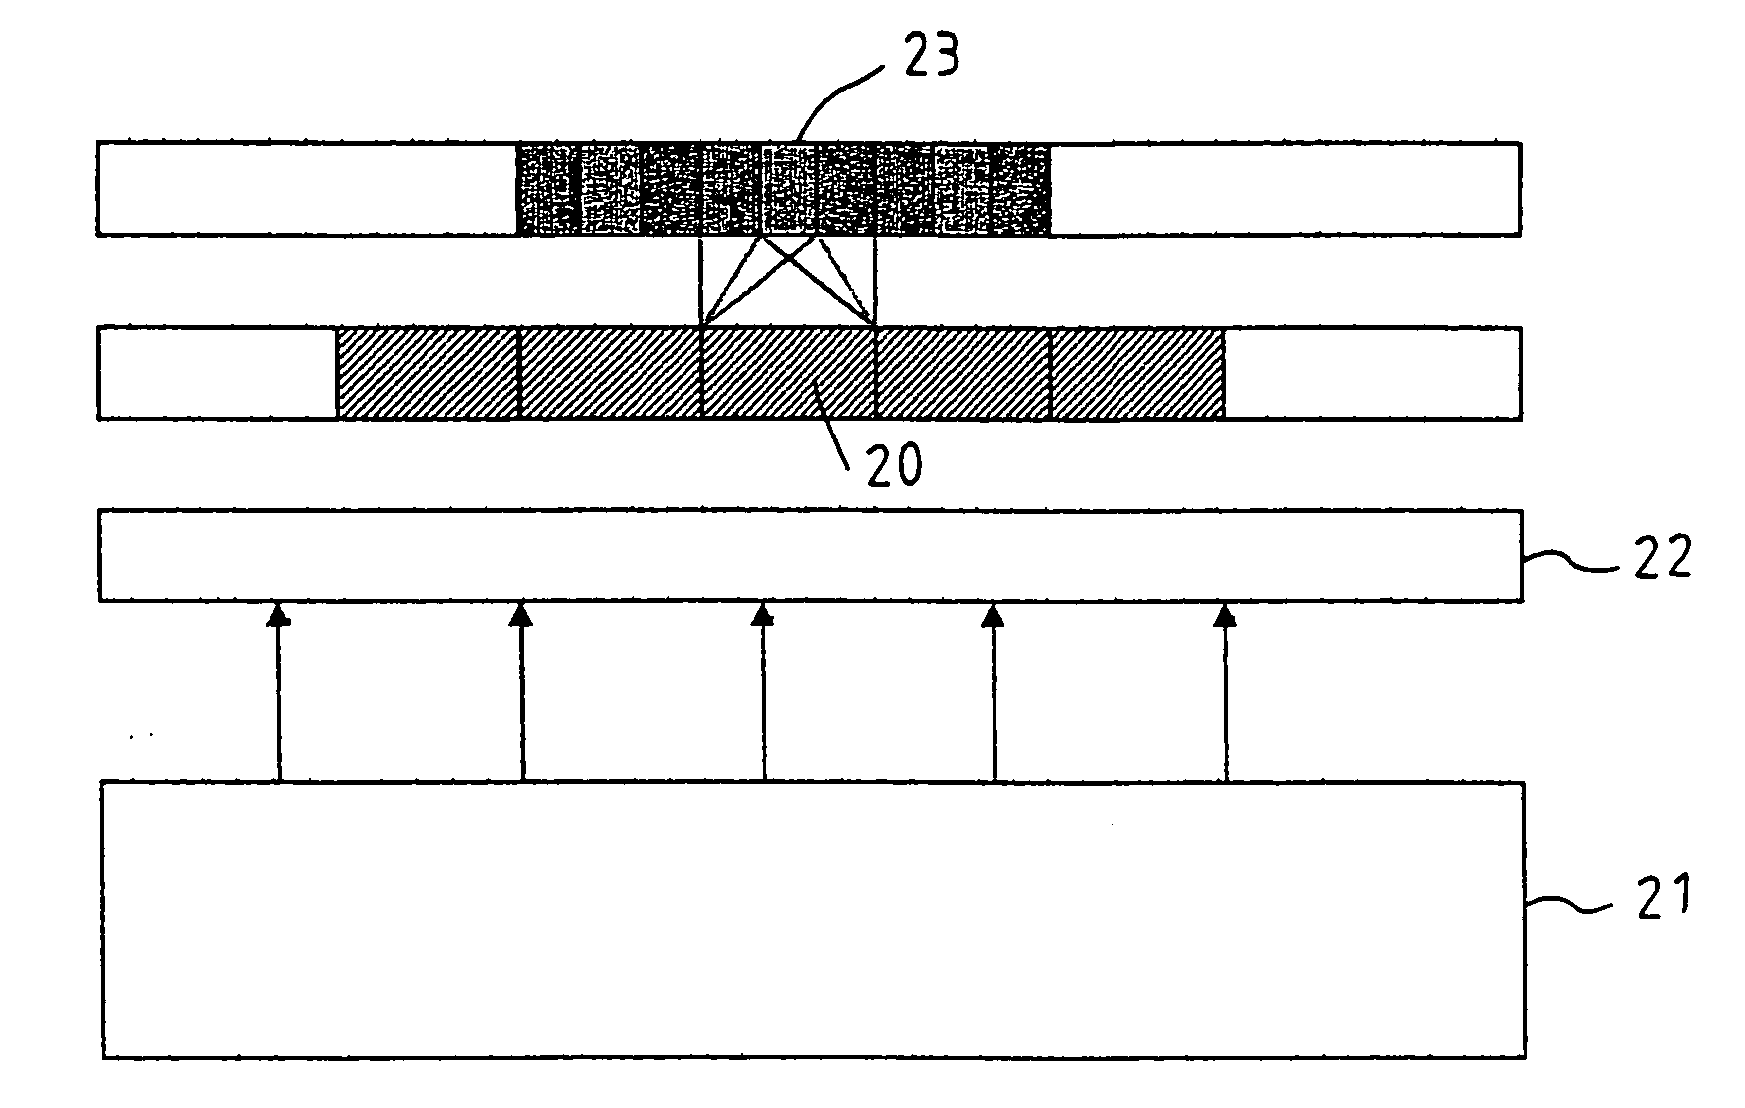 Micro-structure color wavelenght division device